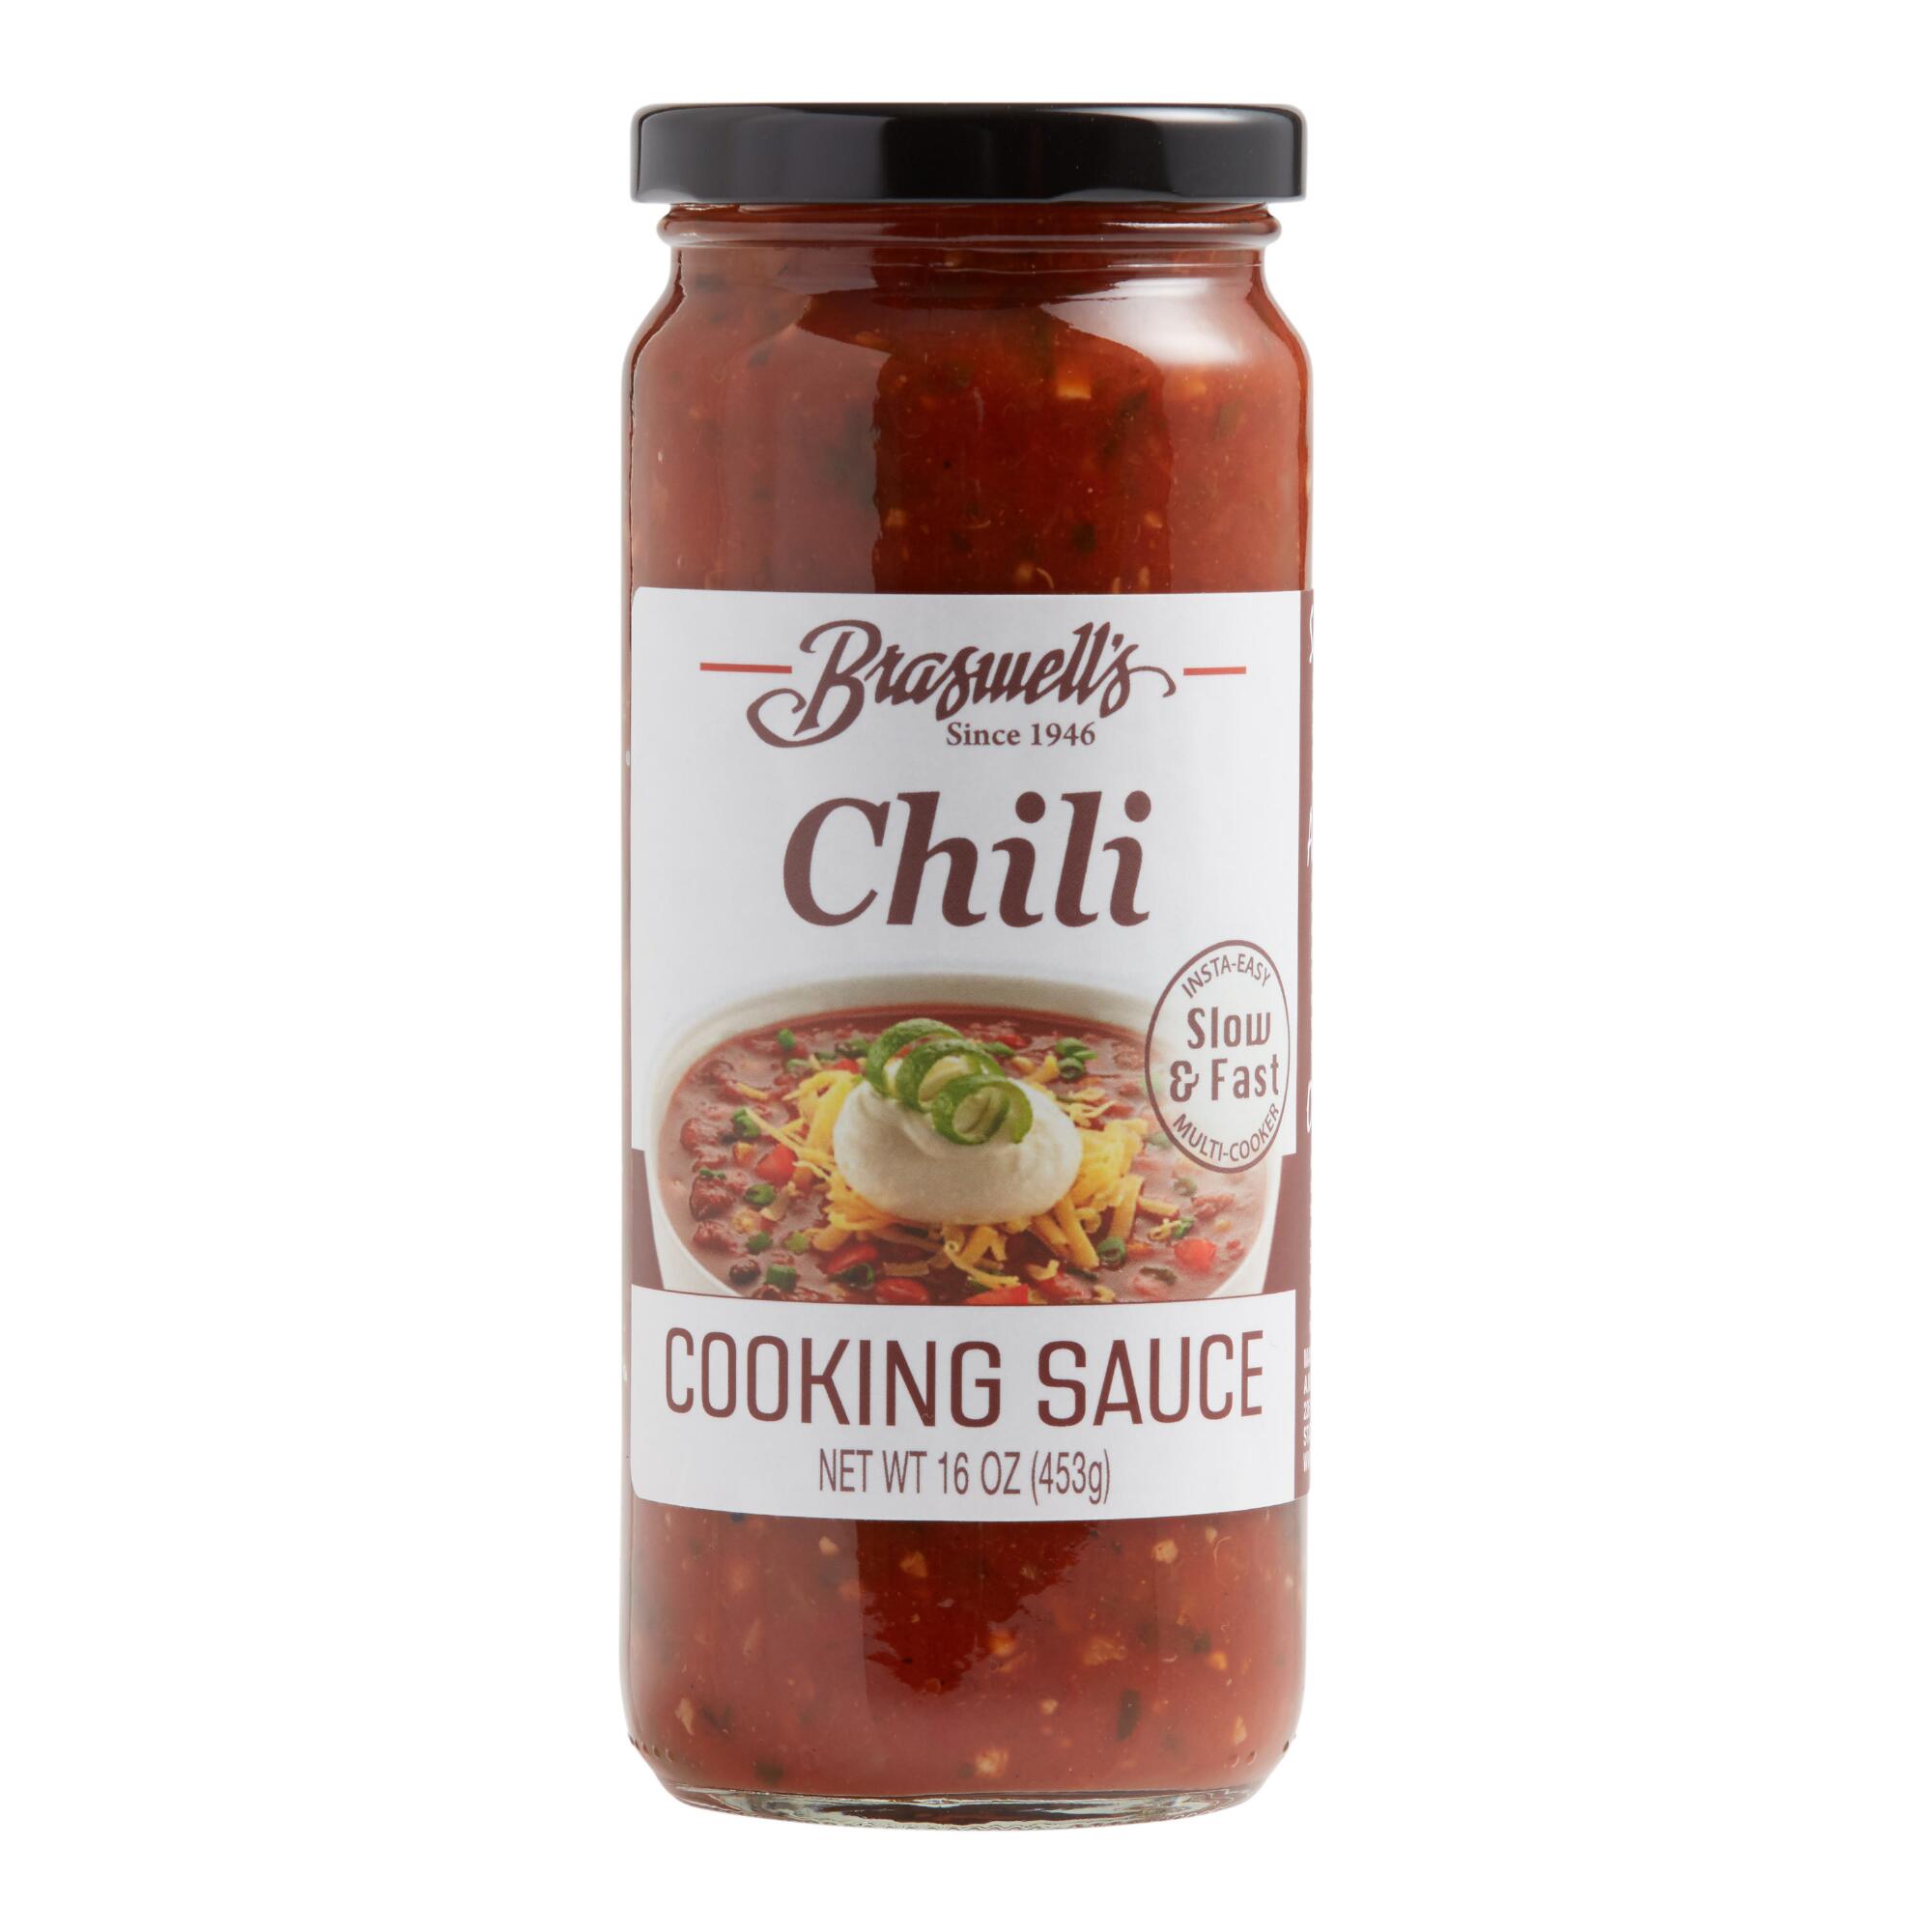 Braswell's Chili Slow Cooker Cooking Sauce by World Market